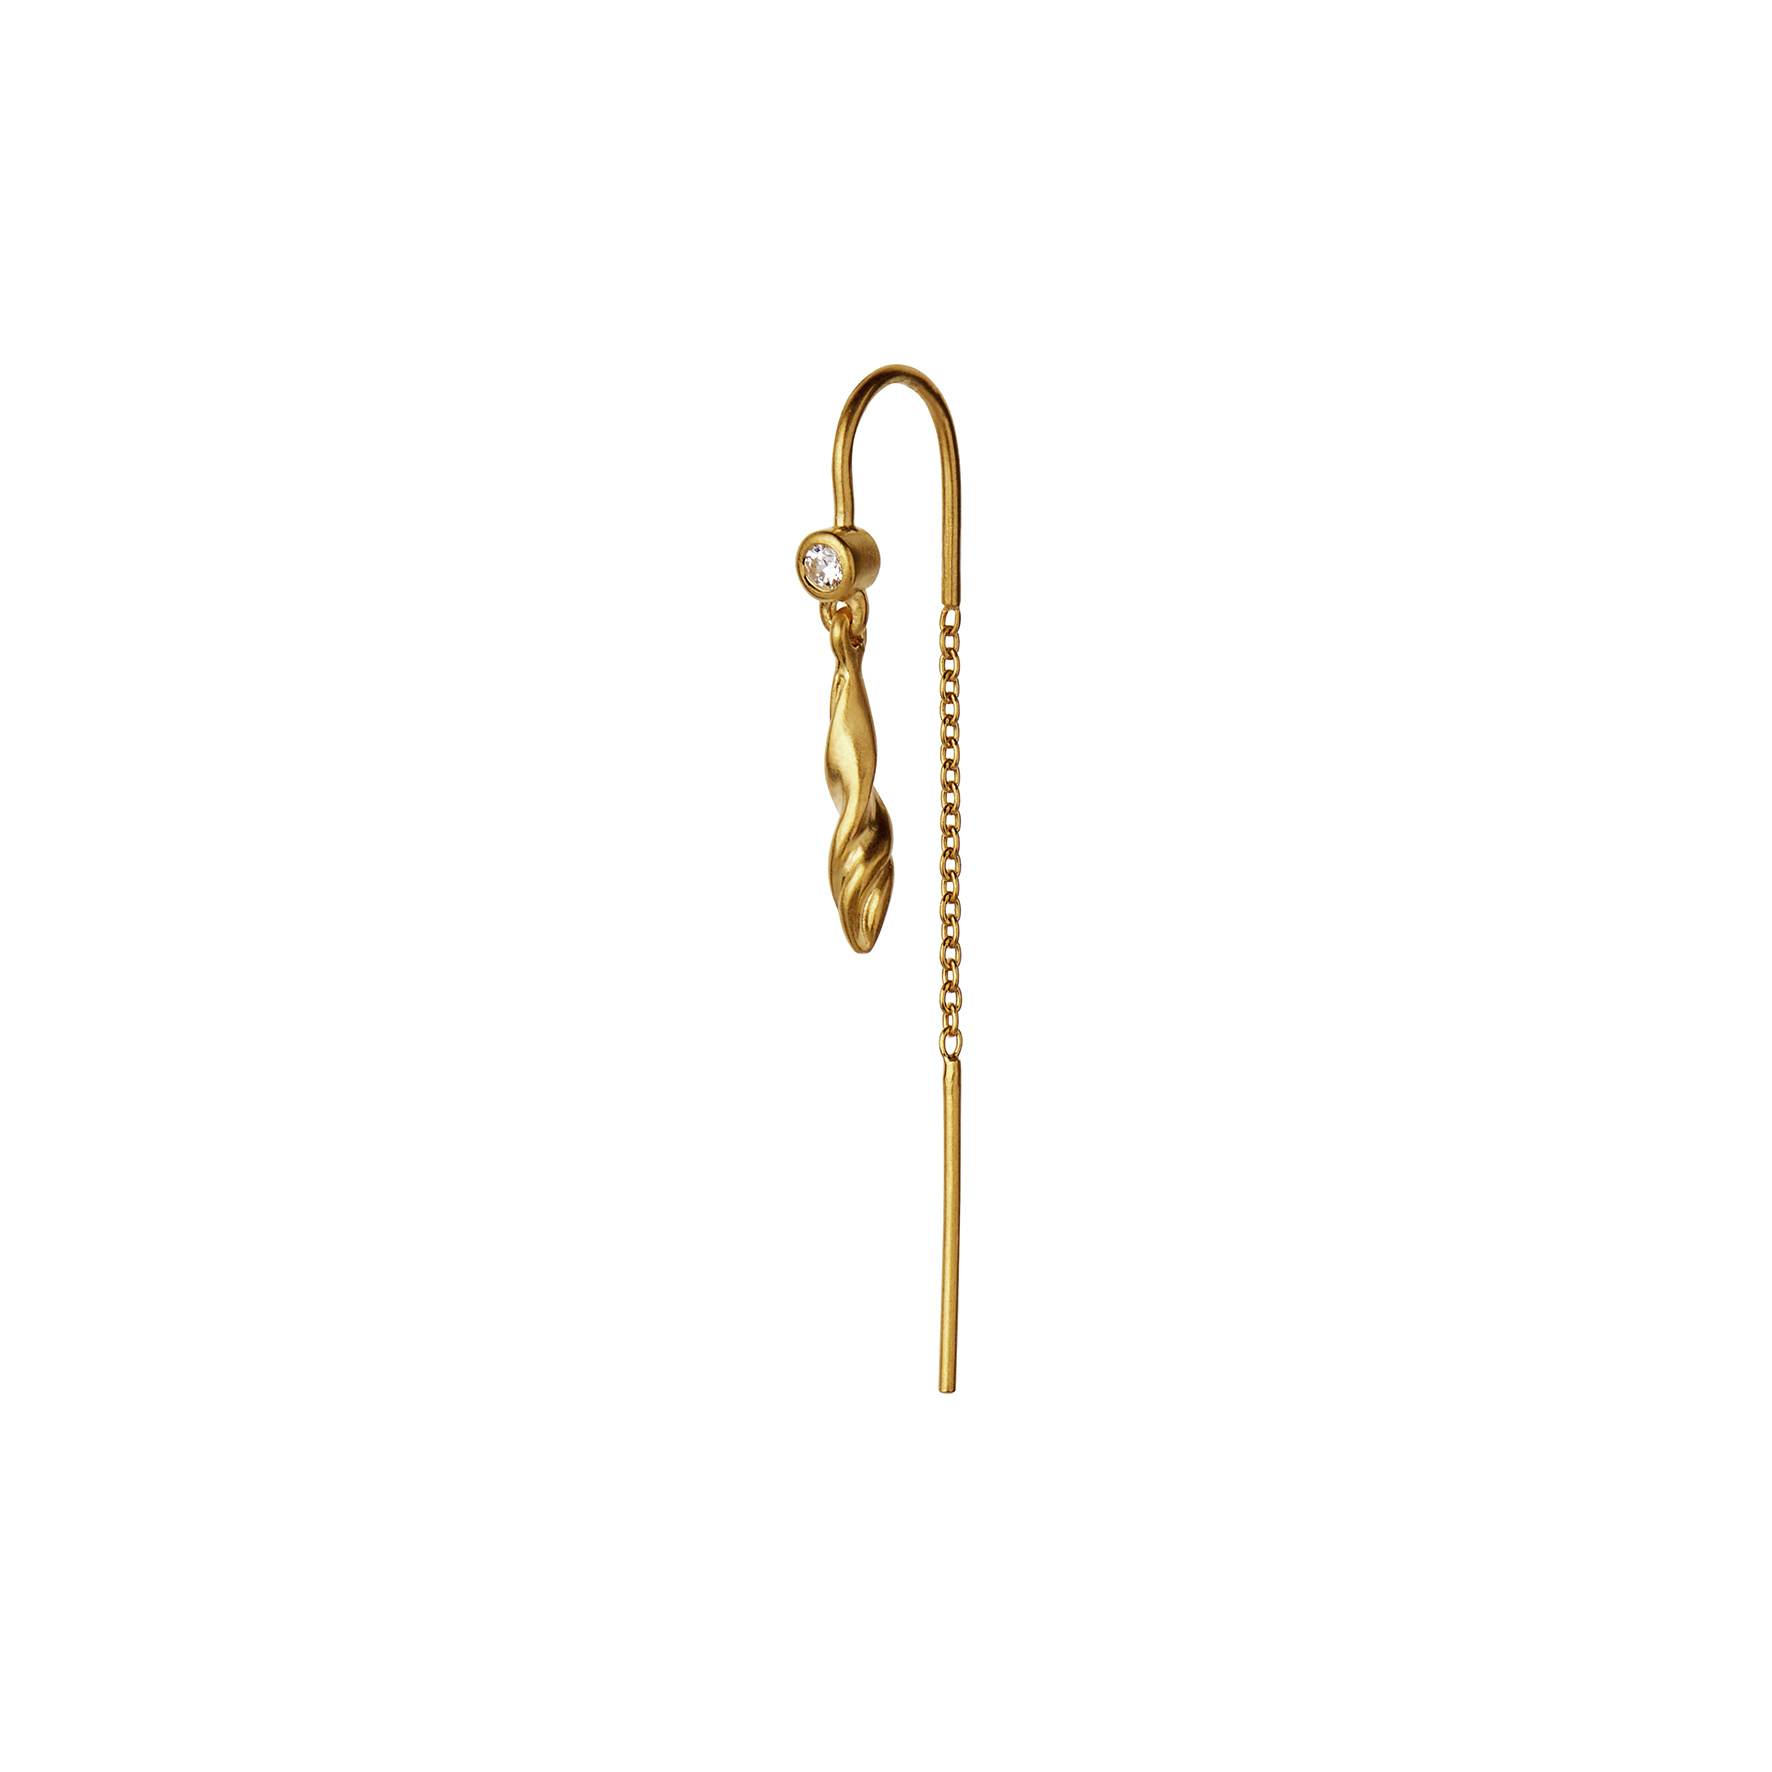 Dangling Petit Velvet Earchain from STINE A Jewelry in Goldplated-Silver Sterling 925